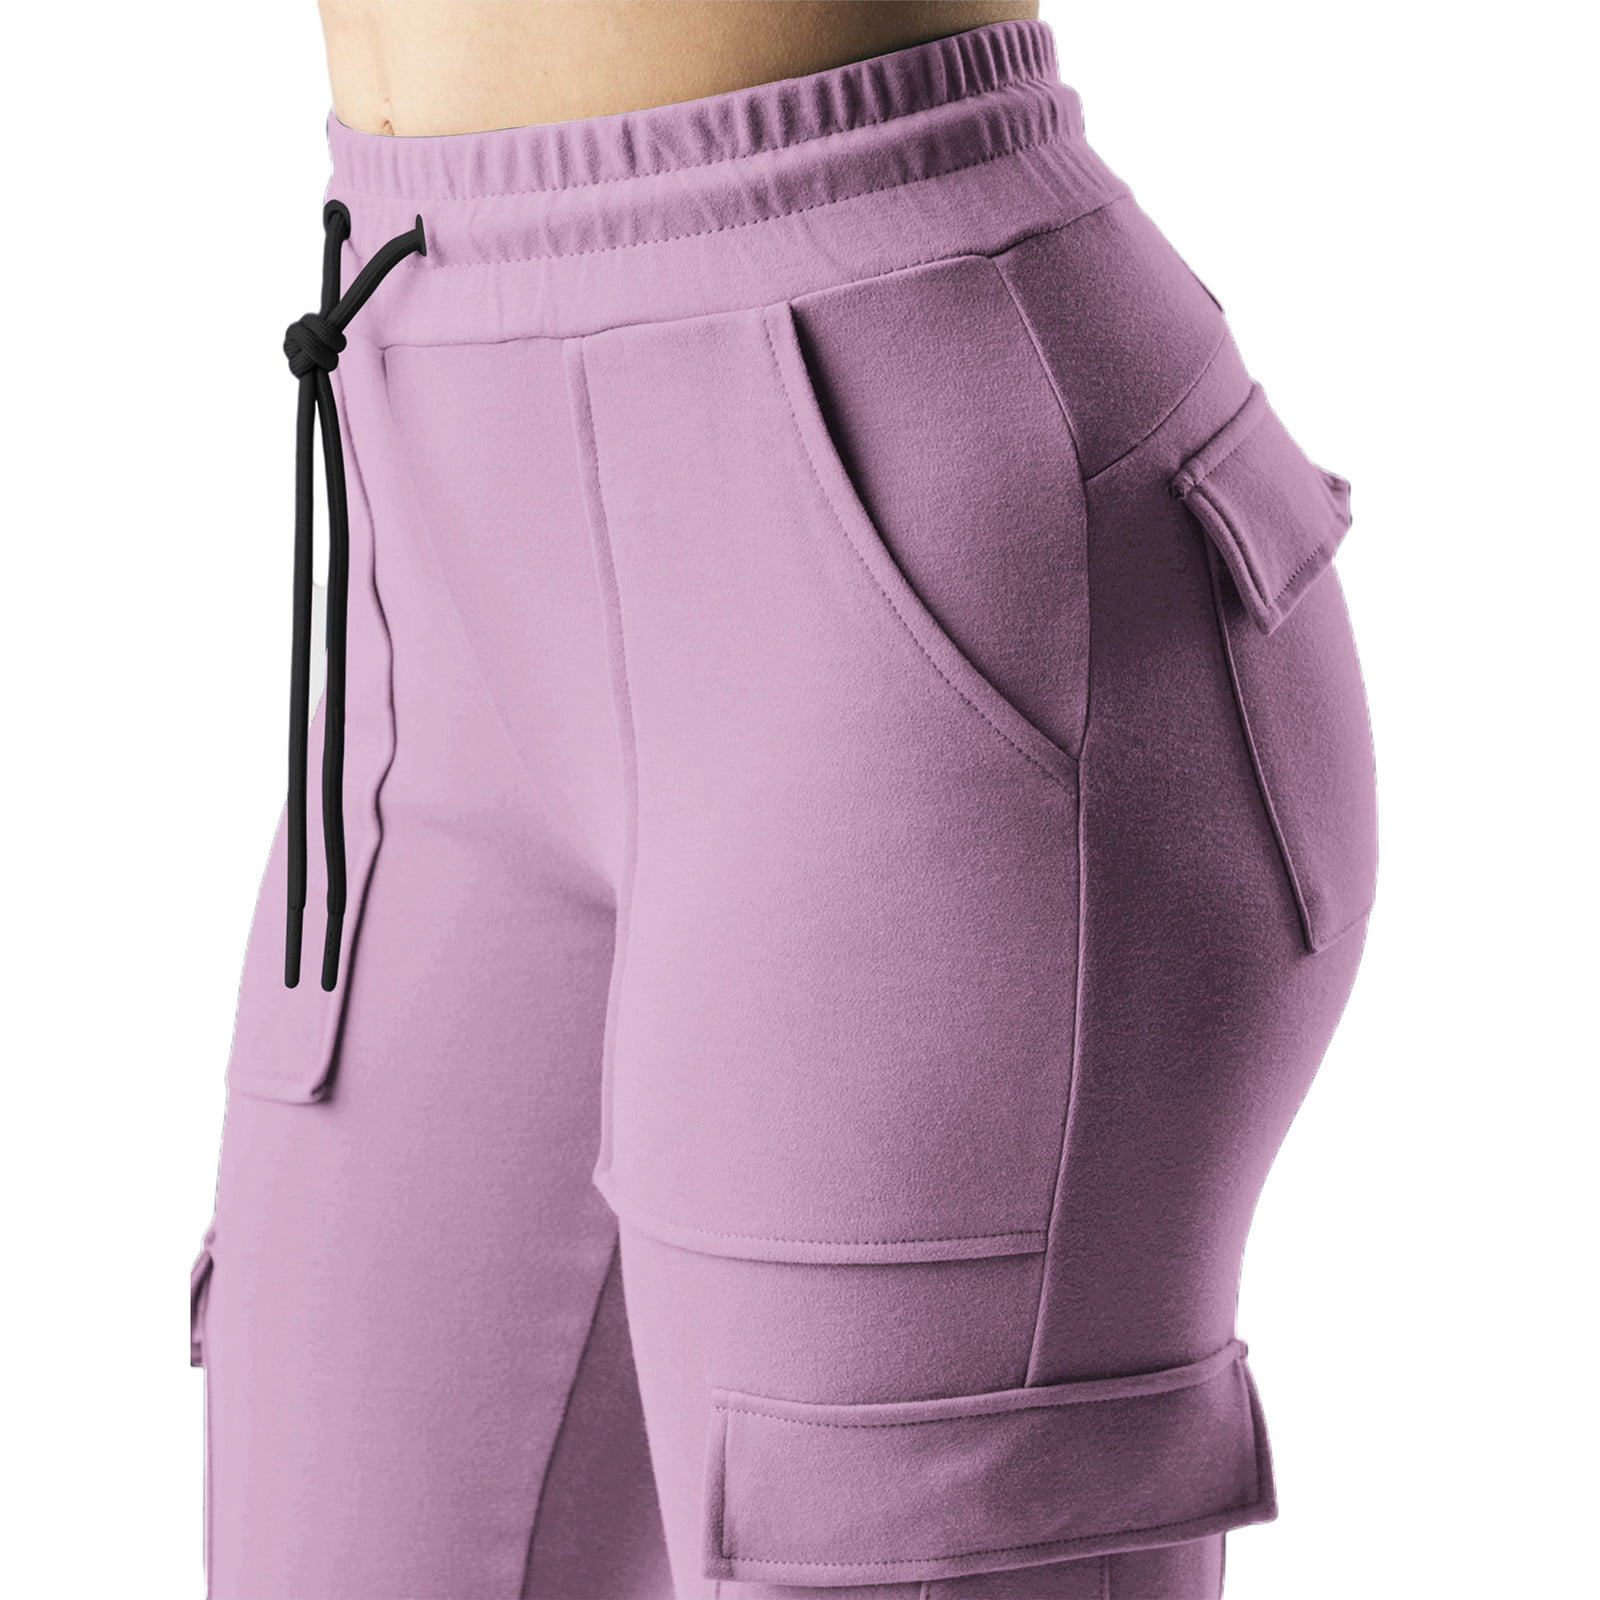 COCO.ME Leggings with Pockets for Women High Waisted Yoga Pants for  Women,Tummy Control Workout Peach-Hip Leg Pants. (X- Large, Dark Purple),  Dark Purple, X-Large : Buy Online at Best Price in KSA 